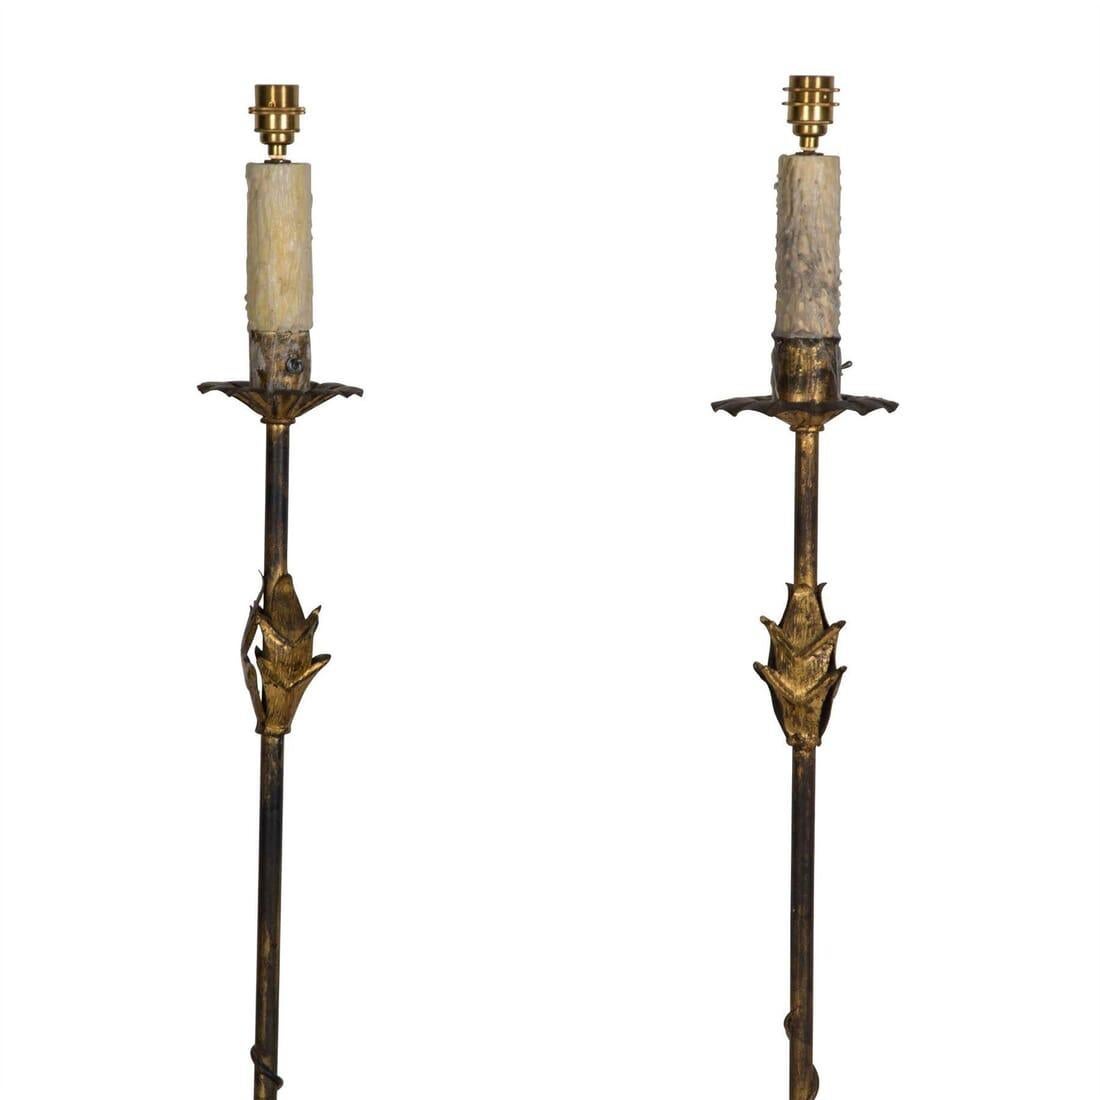 A pair of 20th century Spanish gilded wrought iron floor lamps.

These proud floor lamps emit the raw and fine detail of metal that has been smithed and hand-forged by a once-talented tradesman.

Please note that shades are not included.